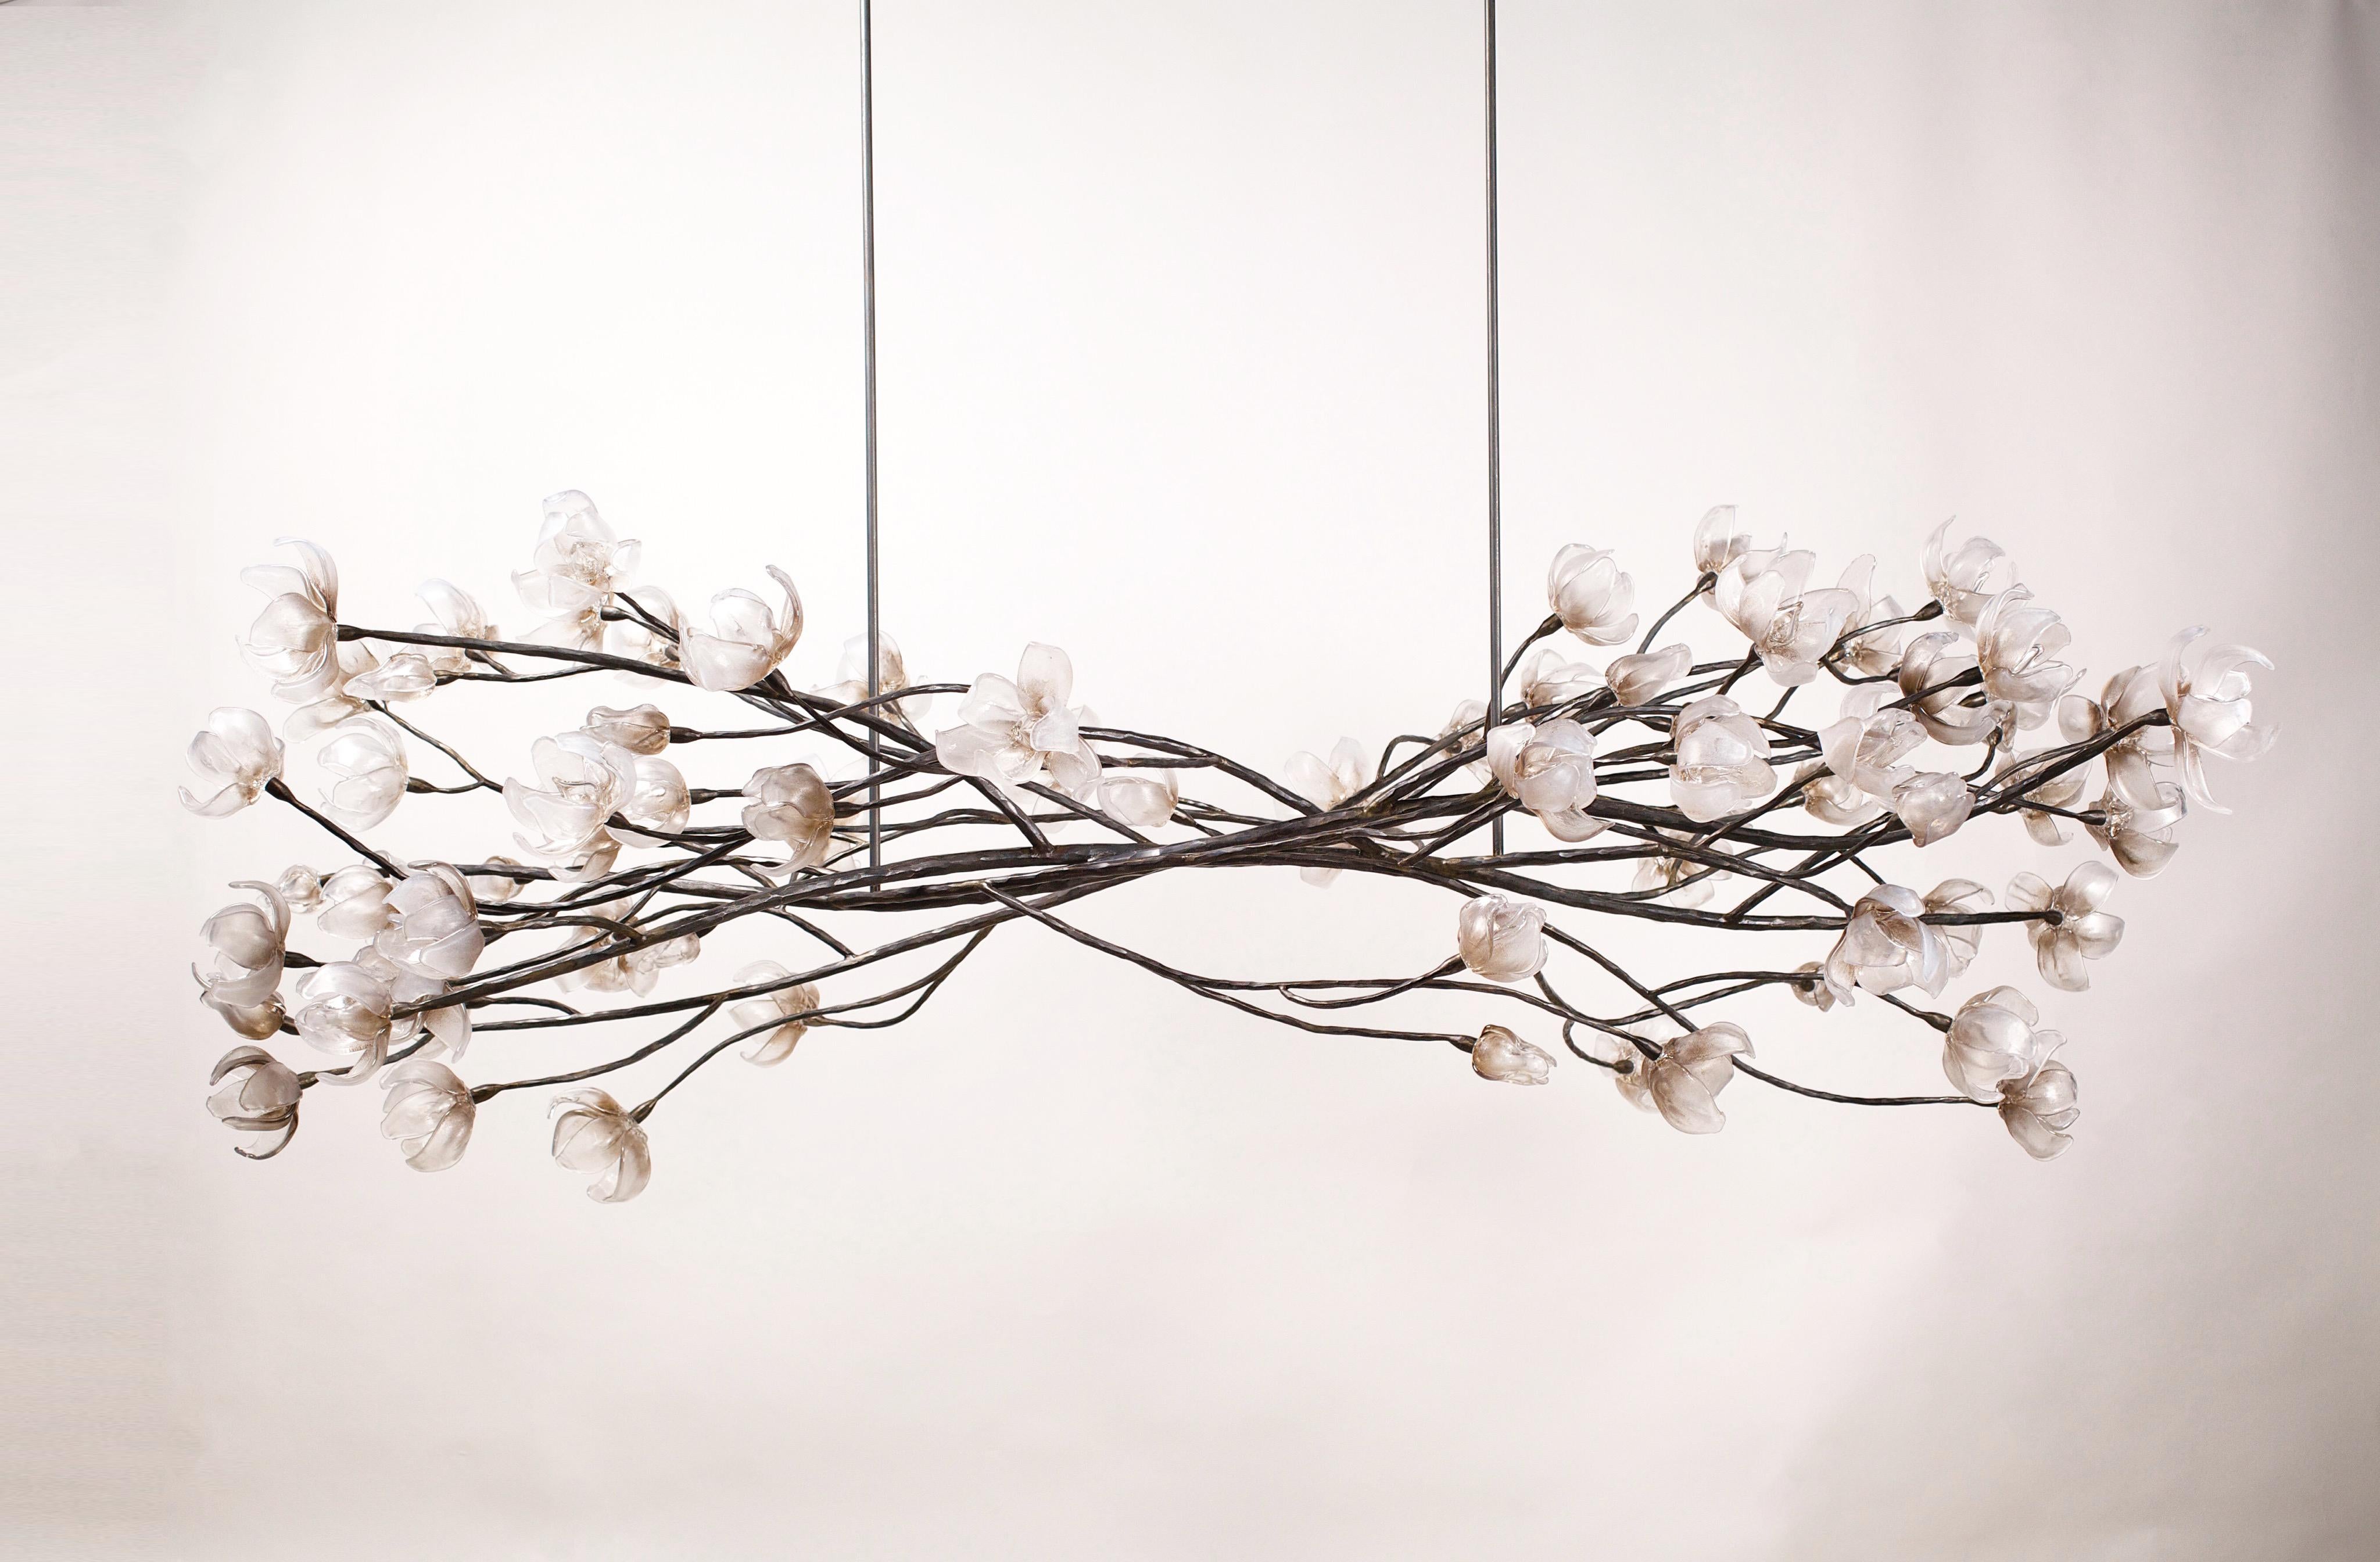 Branching Magnolia Series hanging sculpture by Elizabeth Lyons

Inspired by nature, seventy-five hand sculpted glass magnolia blossoms in various stages of opening adorn a structure of solid forged and welded steel branches. The branches have been